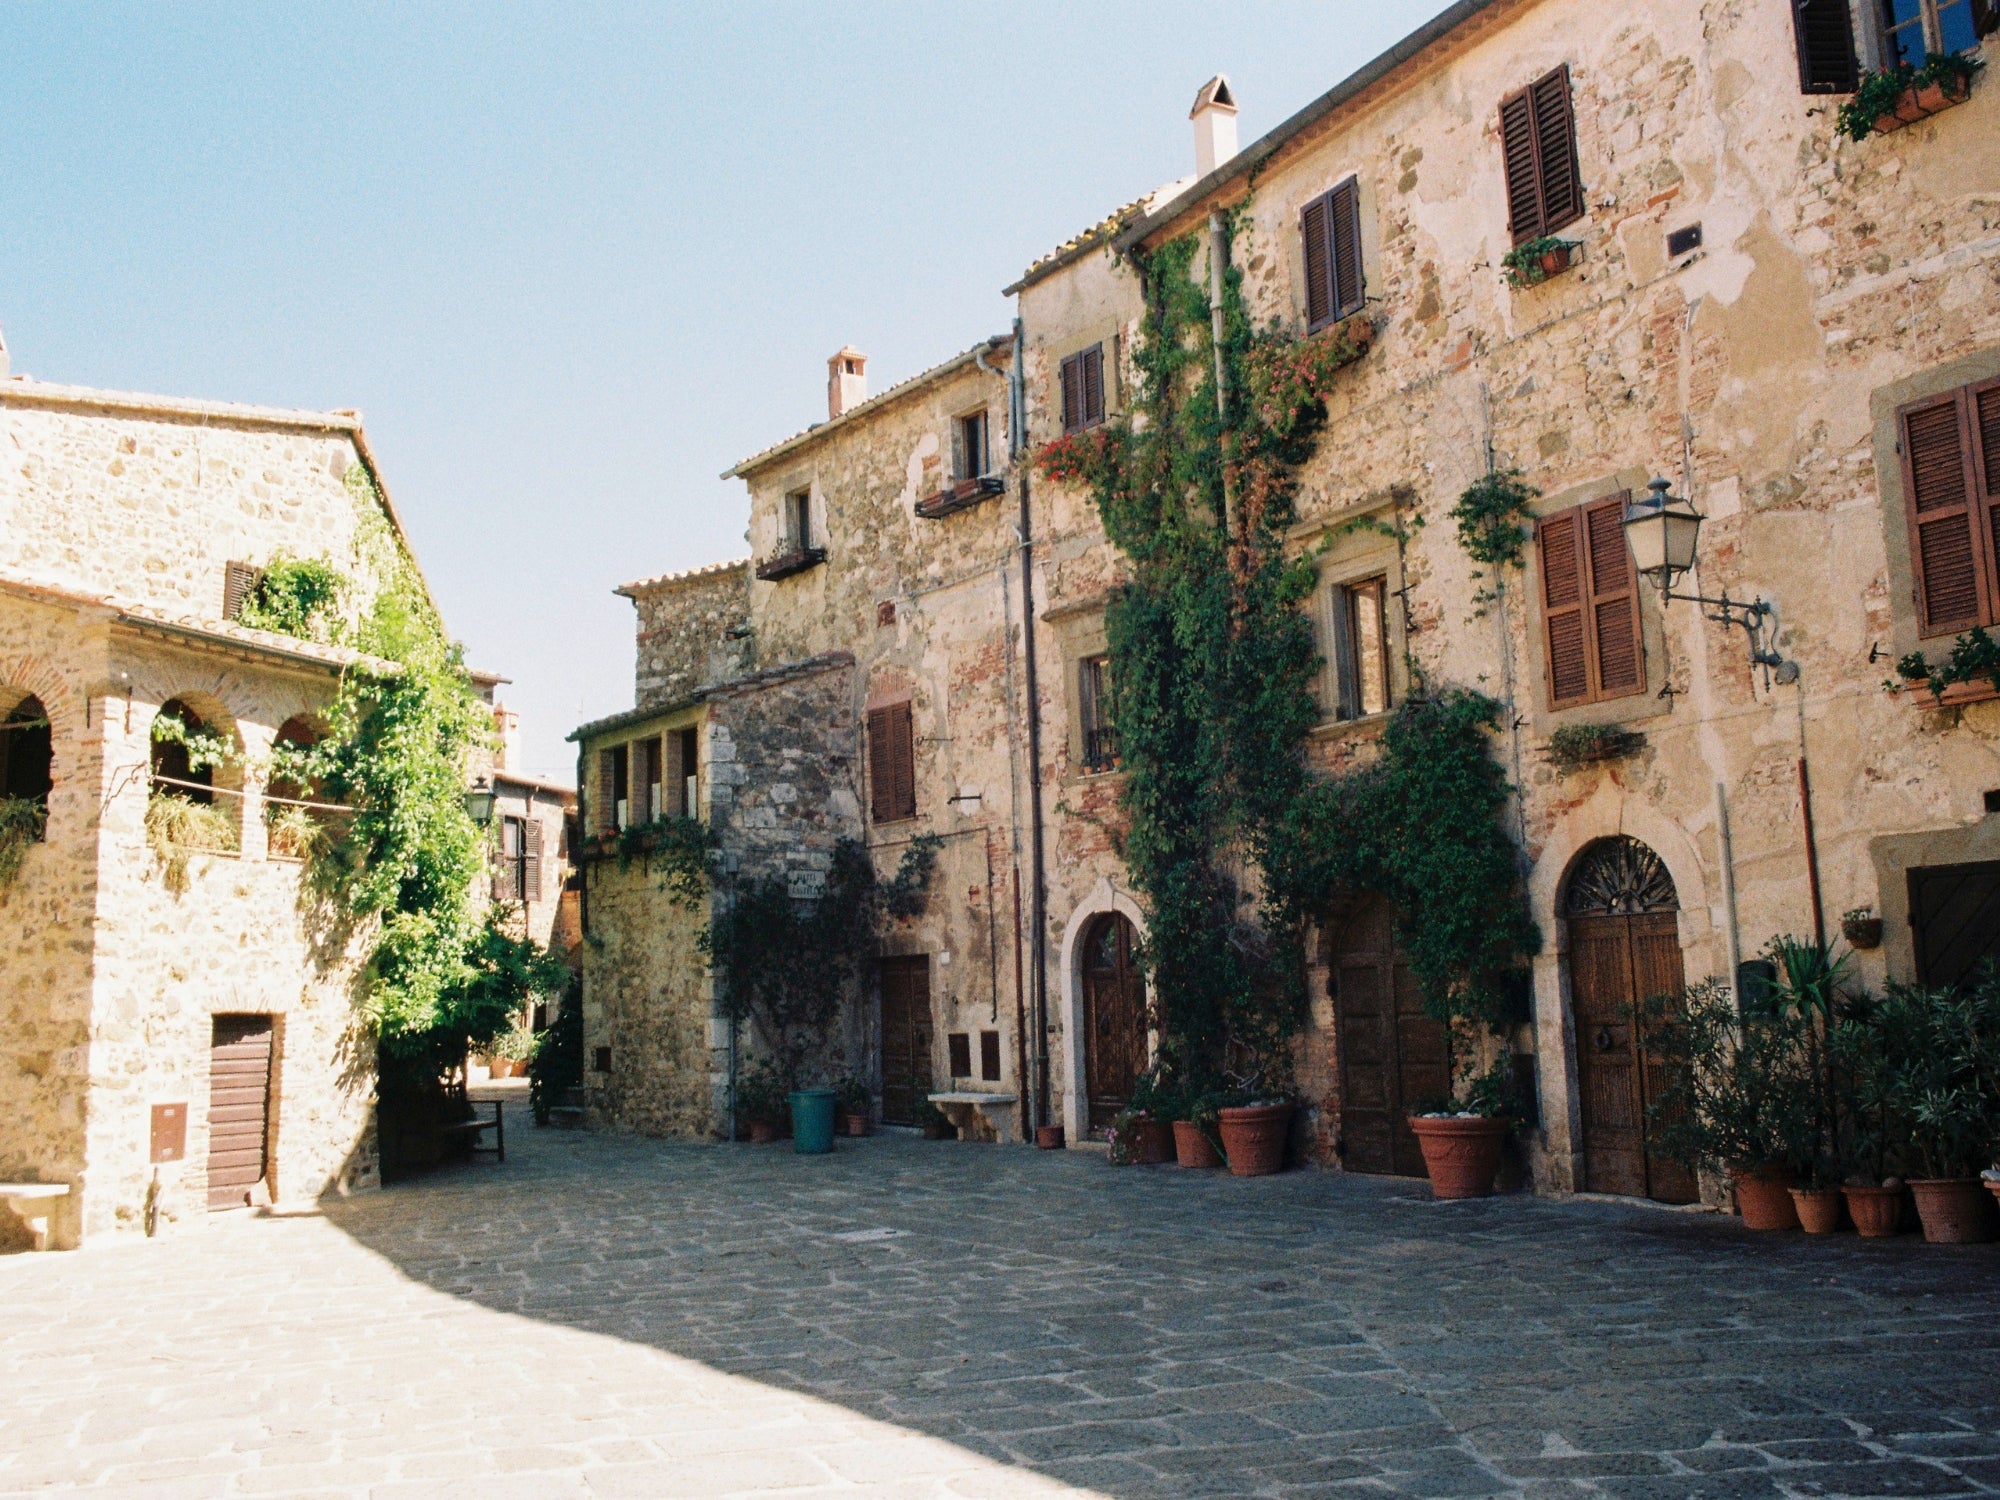 The central square of the medieval village of Montemerano, in Tuscany, with limestone houses and cobbled streets